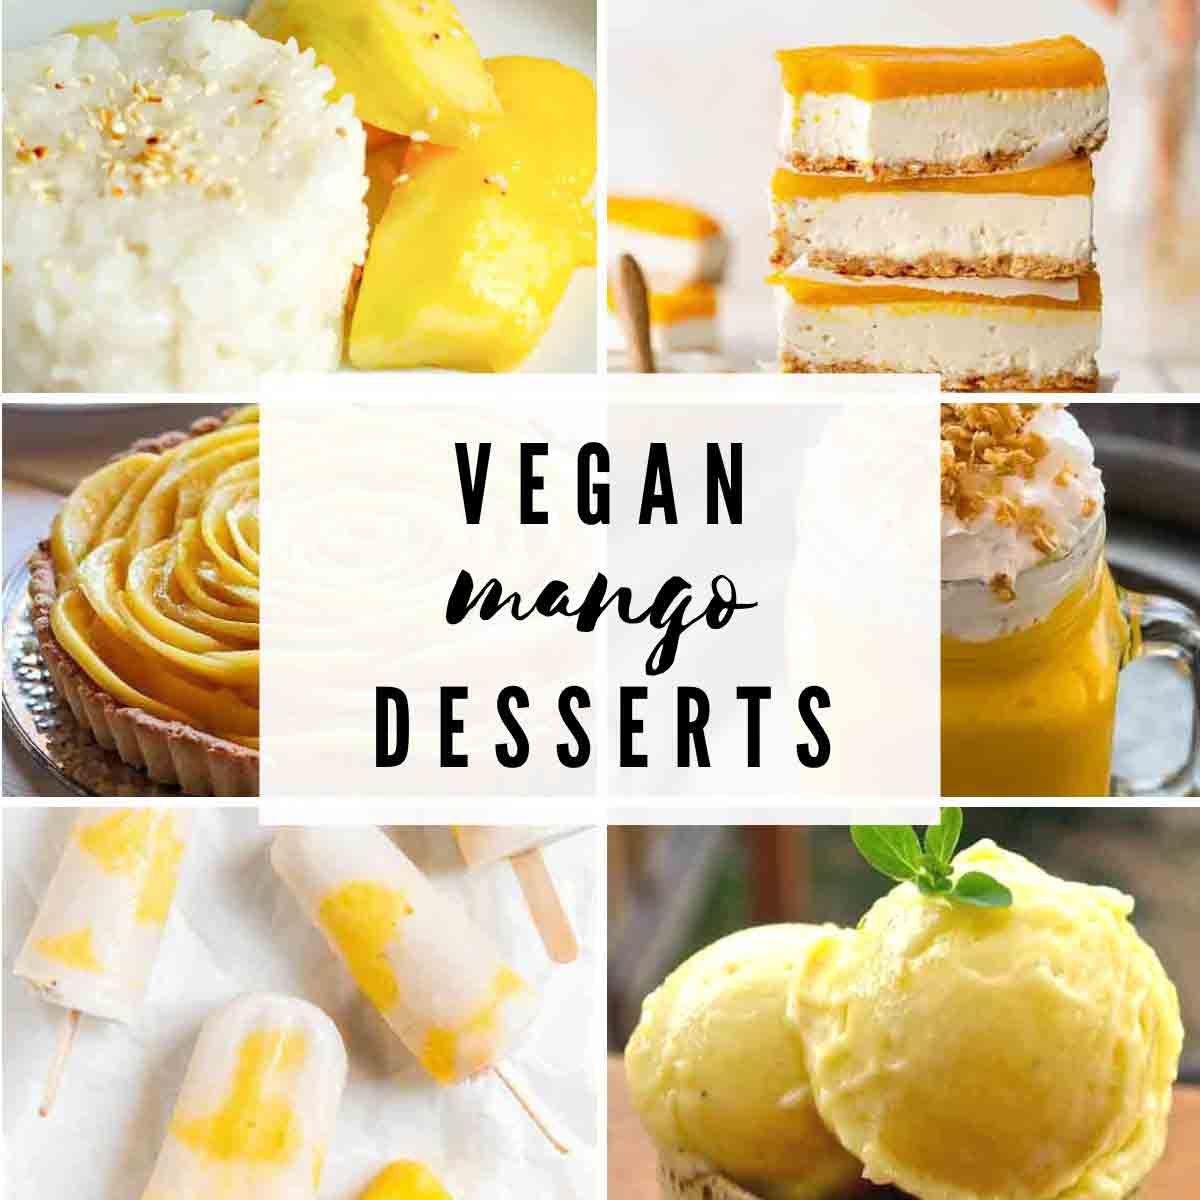 Image Collage Of Vegan Mango Desserts With Text Overlay